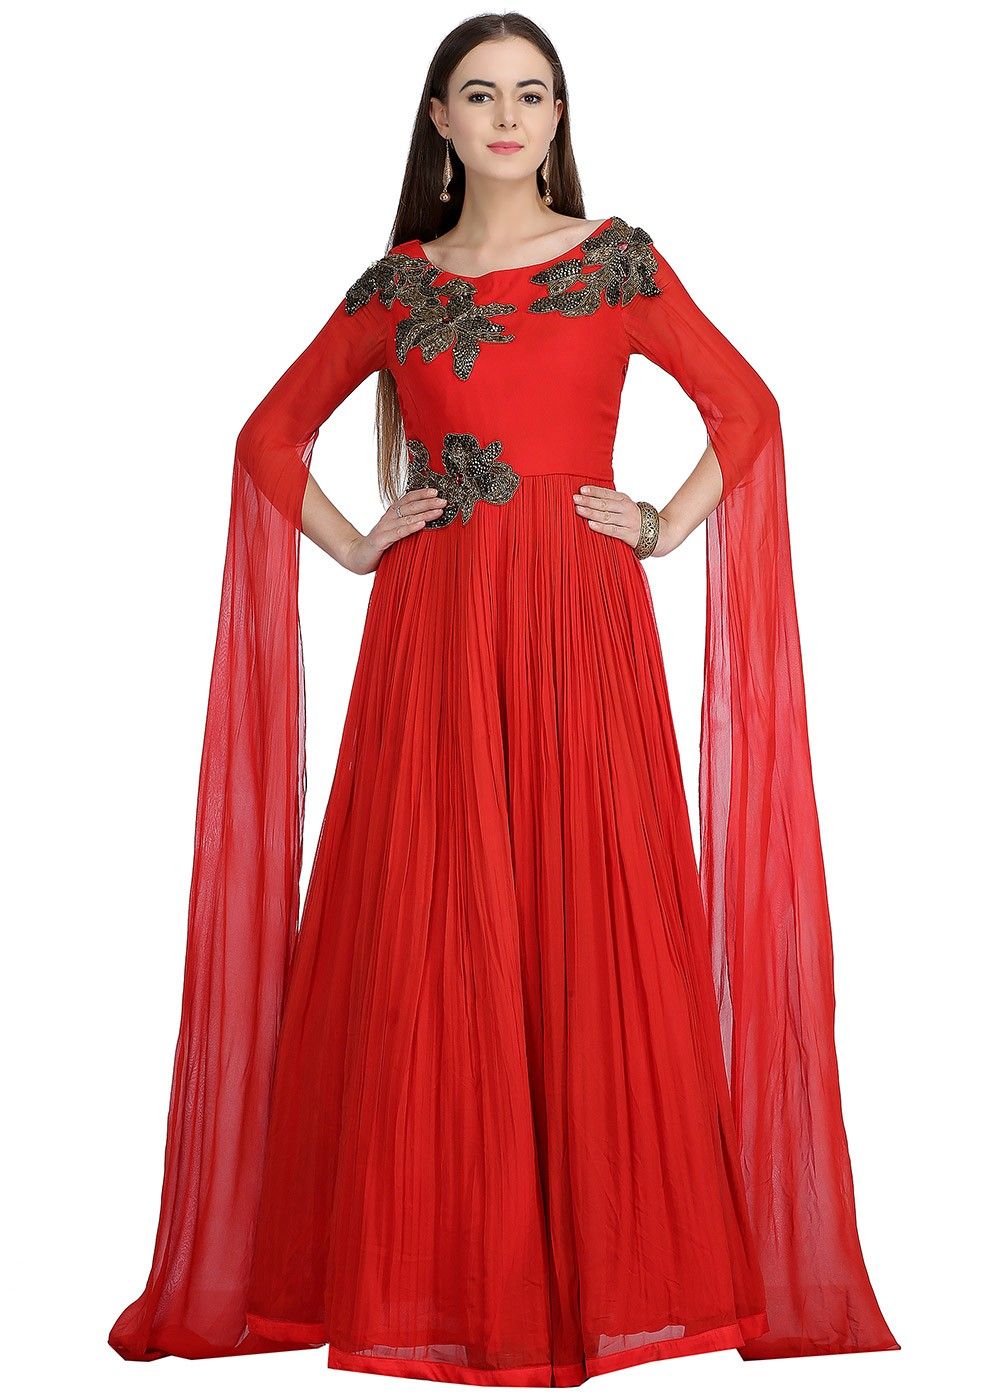 Readymade Cape Sleeved Embellished Red Gown 220GW02